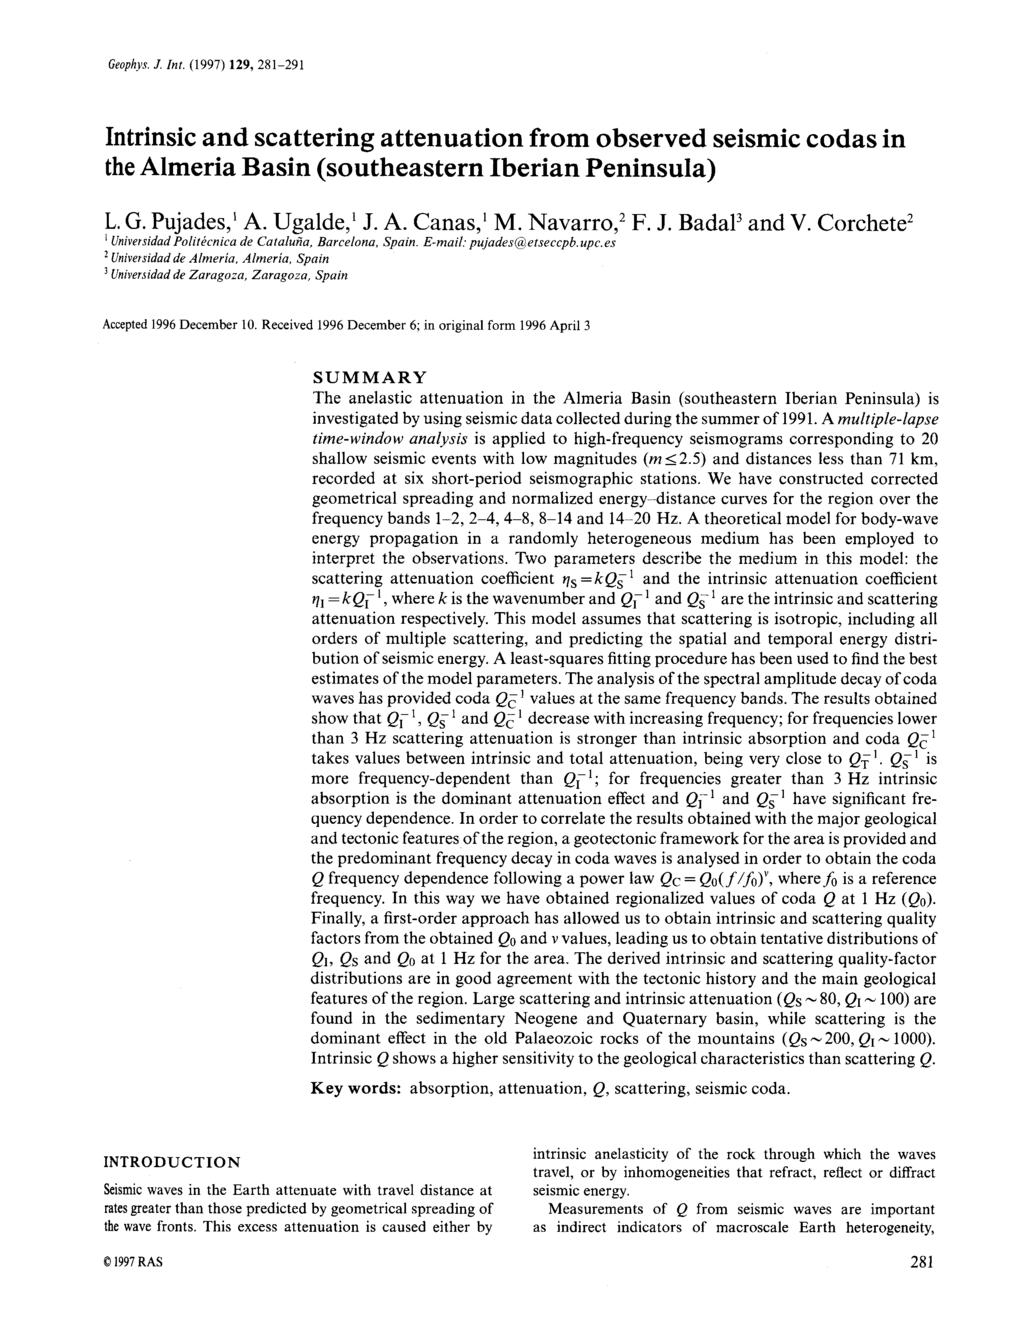 Geophys. J. Int. (1997) 129, 281-291 Intrinsic and scattering attenuation from observed seismic codas in the Almeria Basin (southeastern Iberian Peninsula) L. G. Pujades,' A. Ugalde,' J. A. Canas,' M.